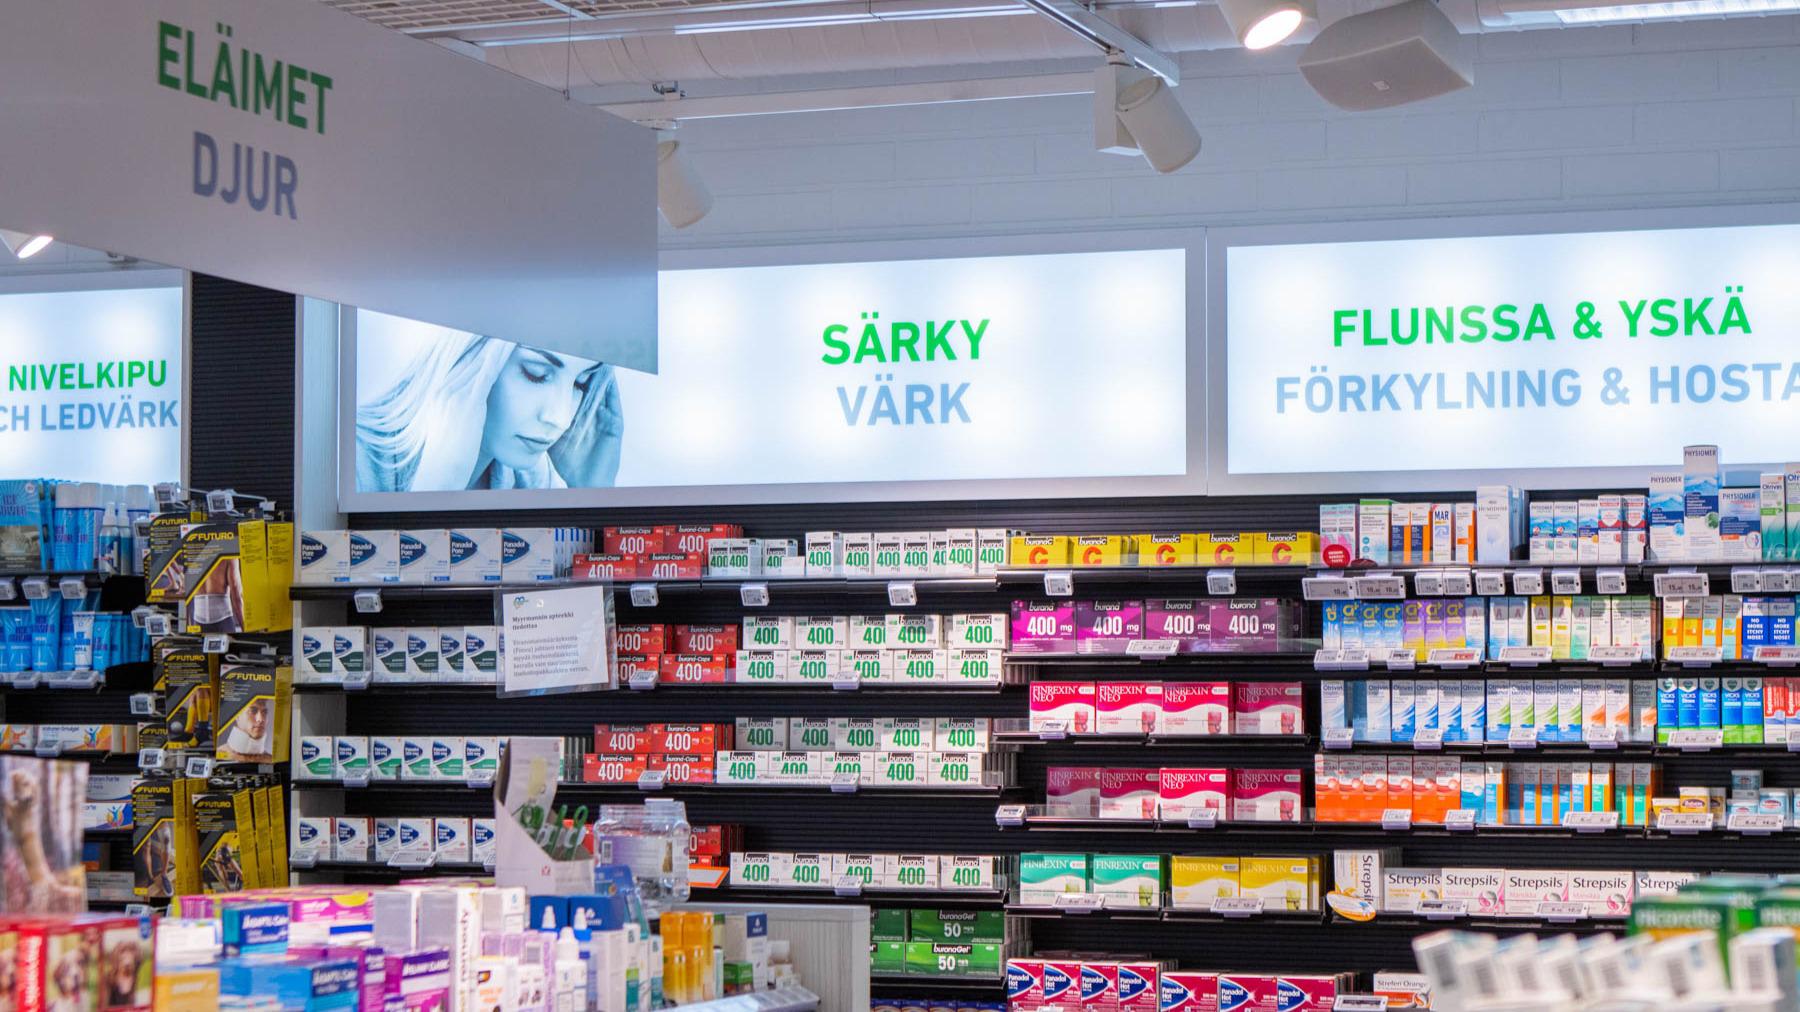 The best addresses for Pharmacy in Vantaa. There are 34 results for your  search. Infobel Finland